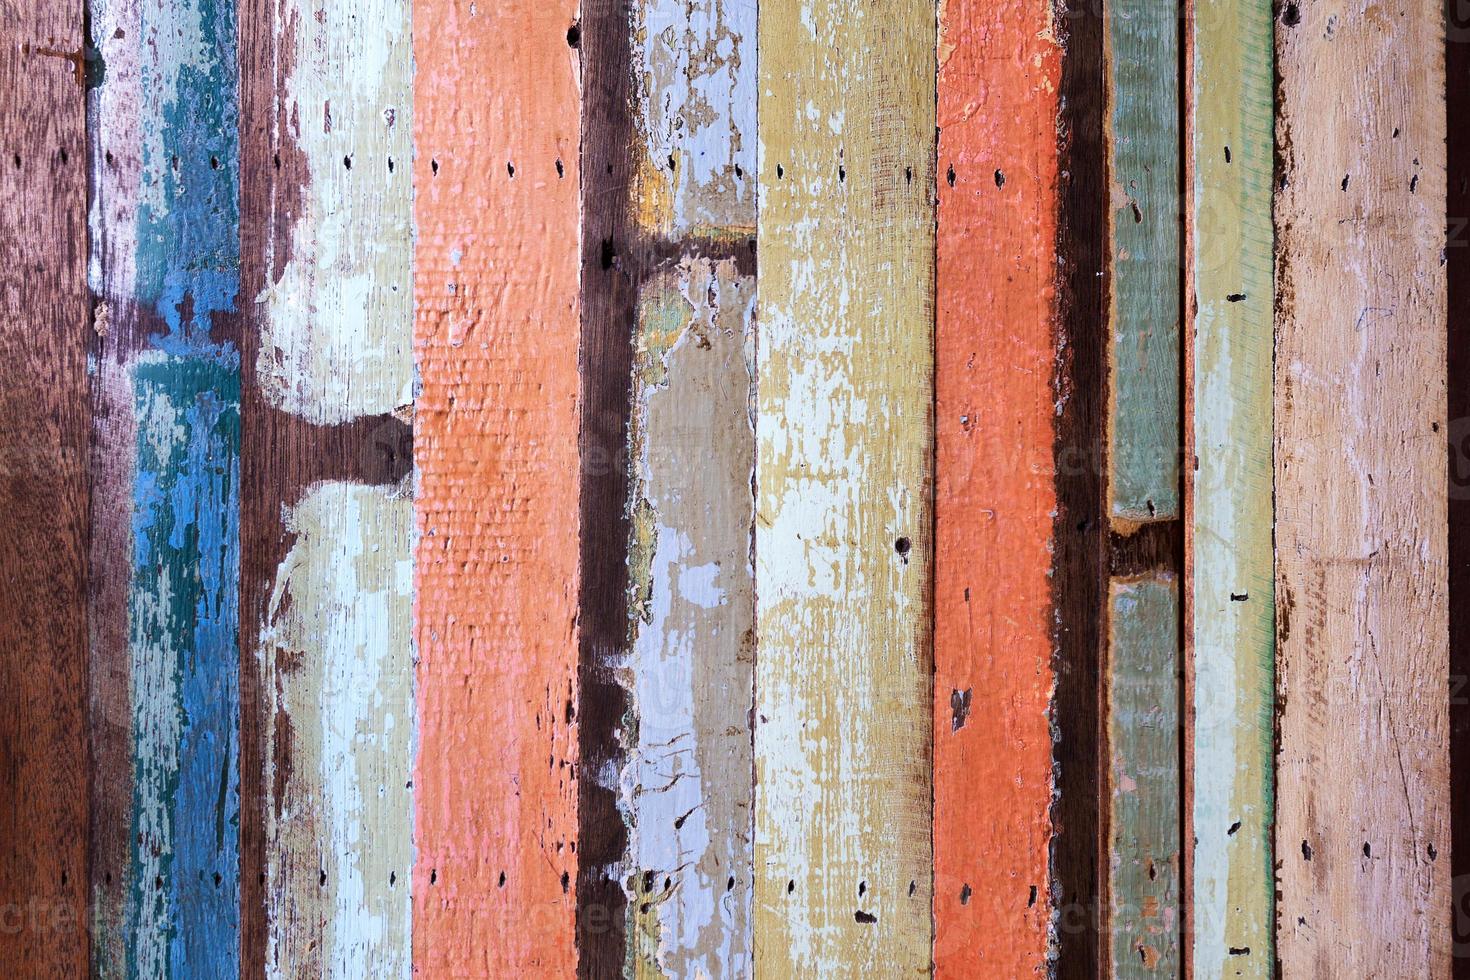 Old wooden floor or wall paint photo